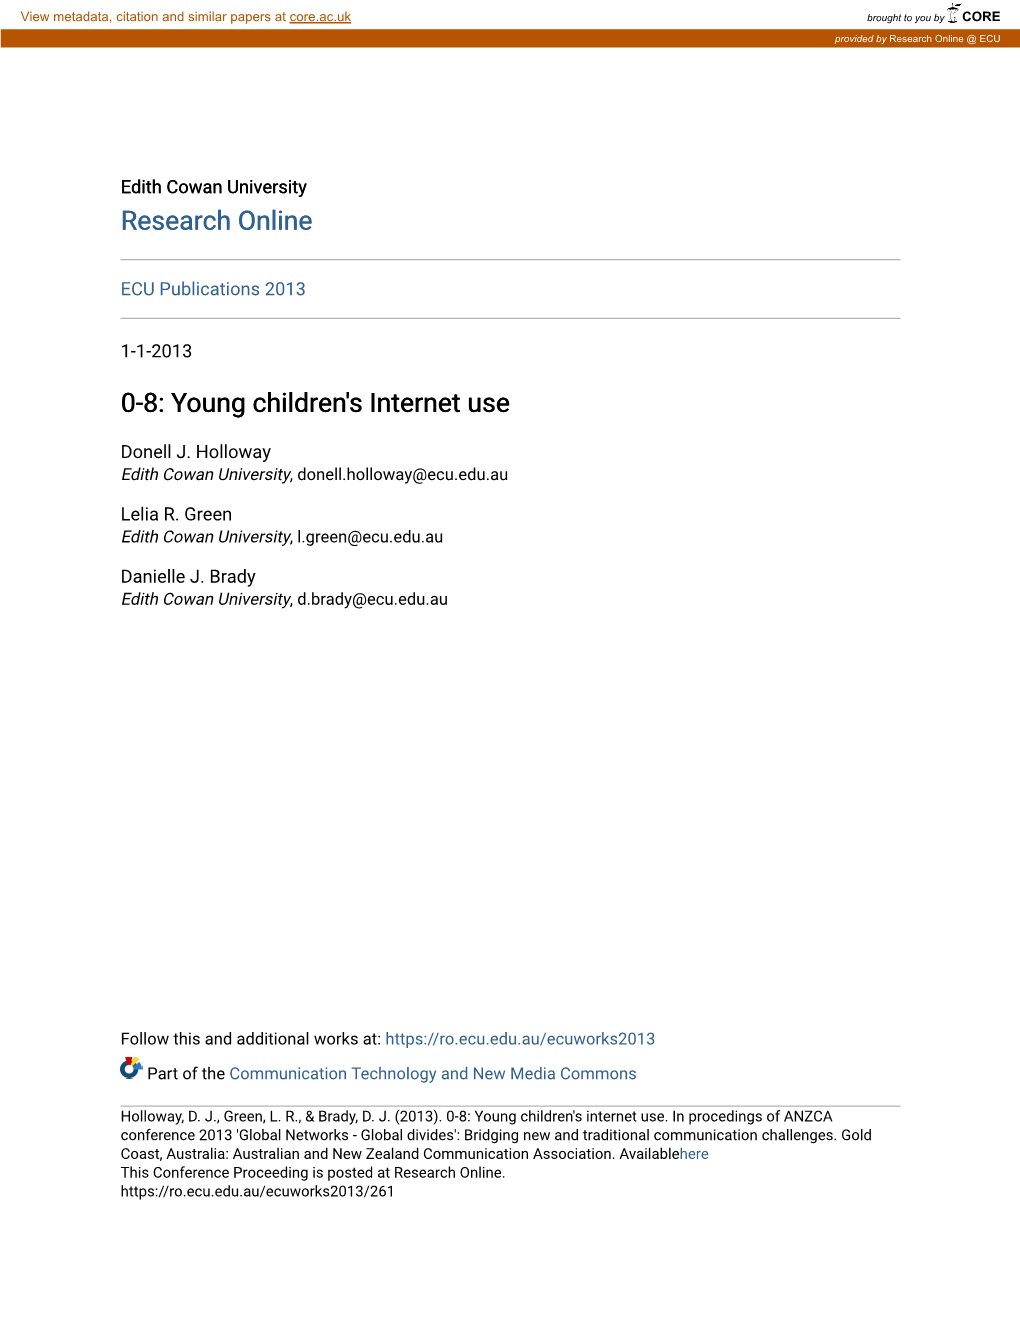 0-8: Young Children's Internet Use